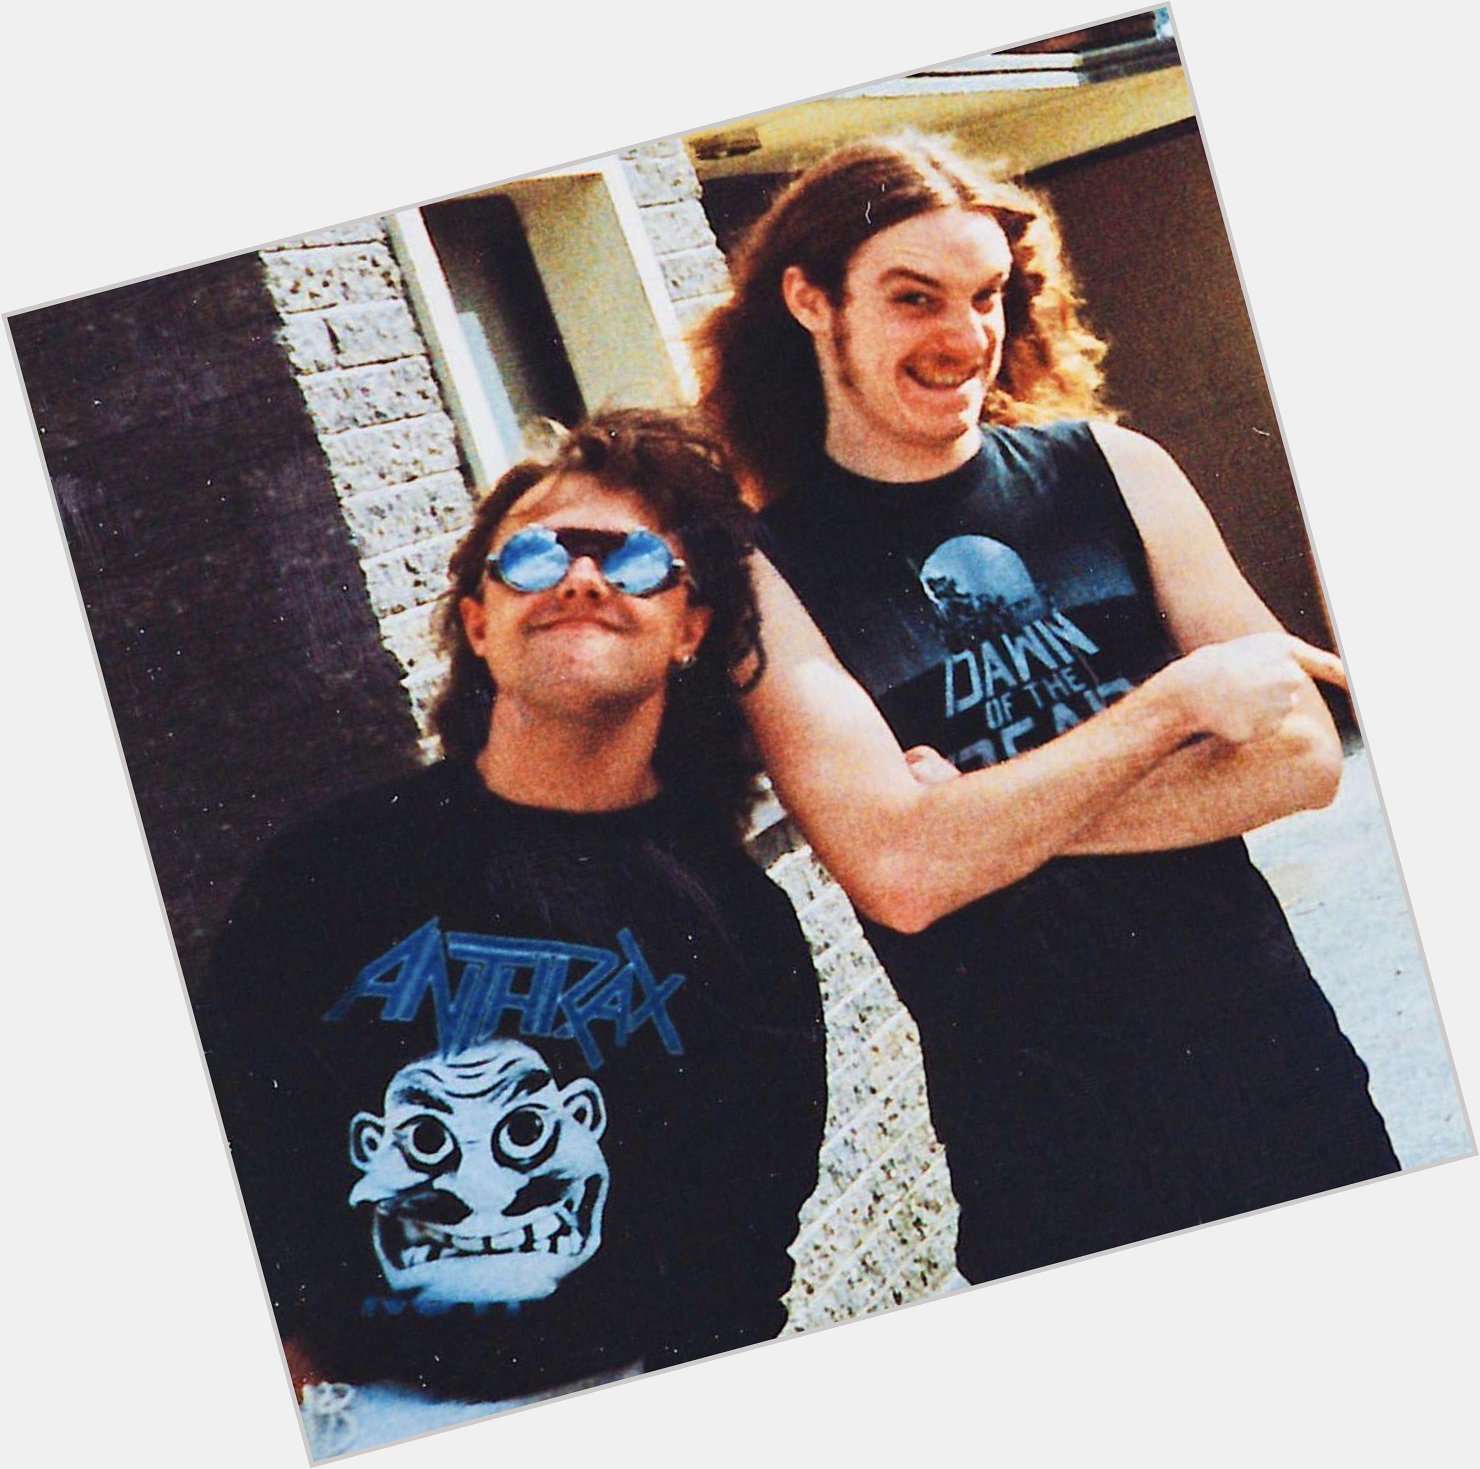 Happy Birthday Cliff Burton. You are my biggest inspiration and you changed my life. Thank you and R.I.P. legend. 